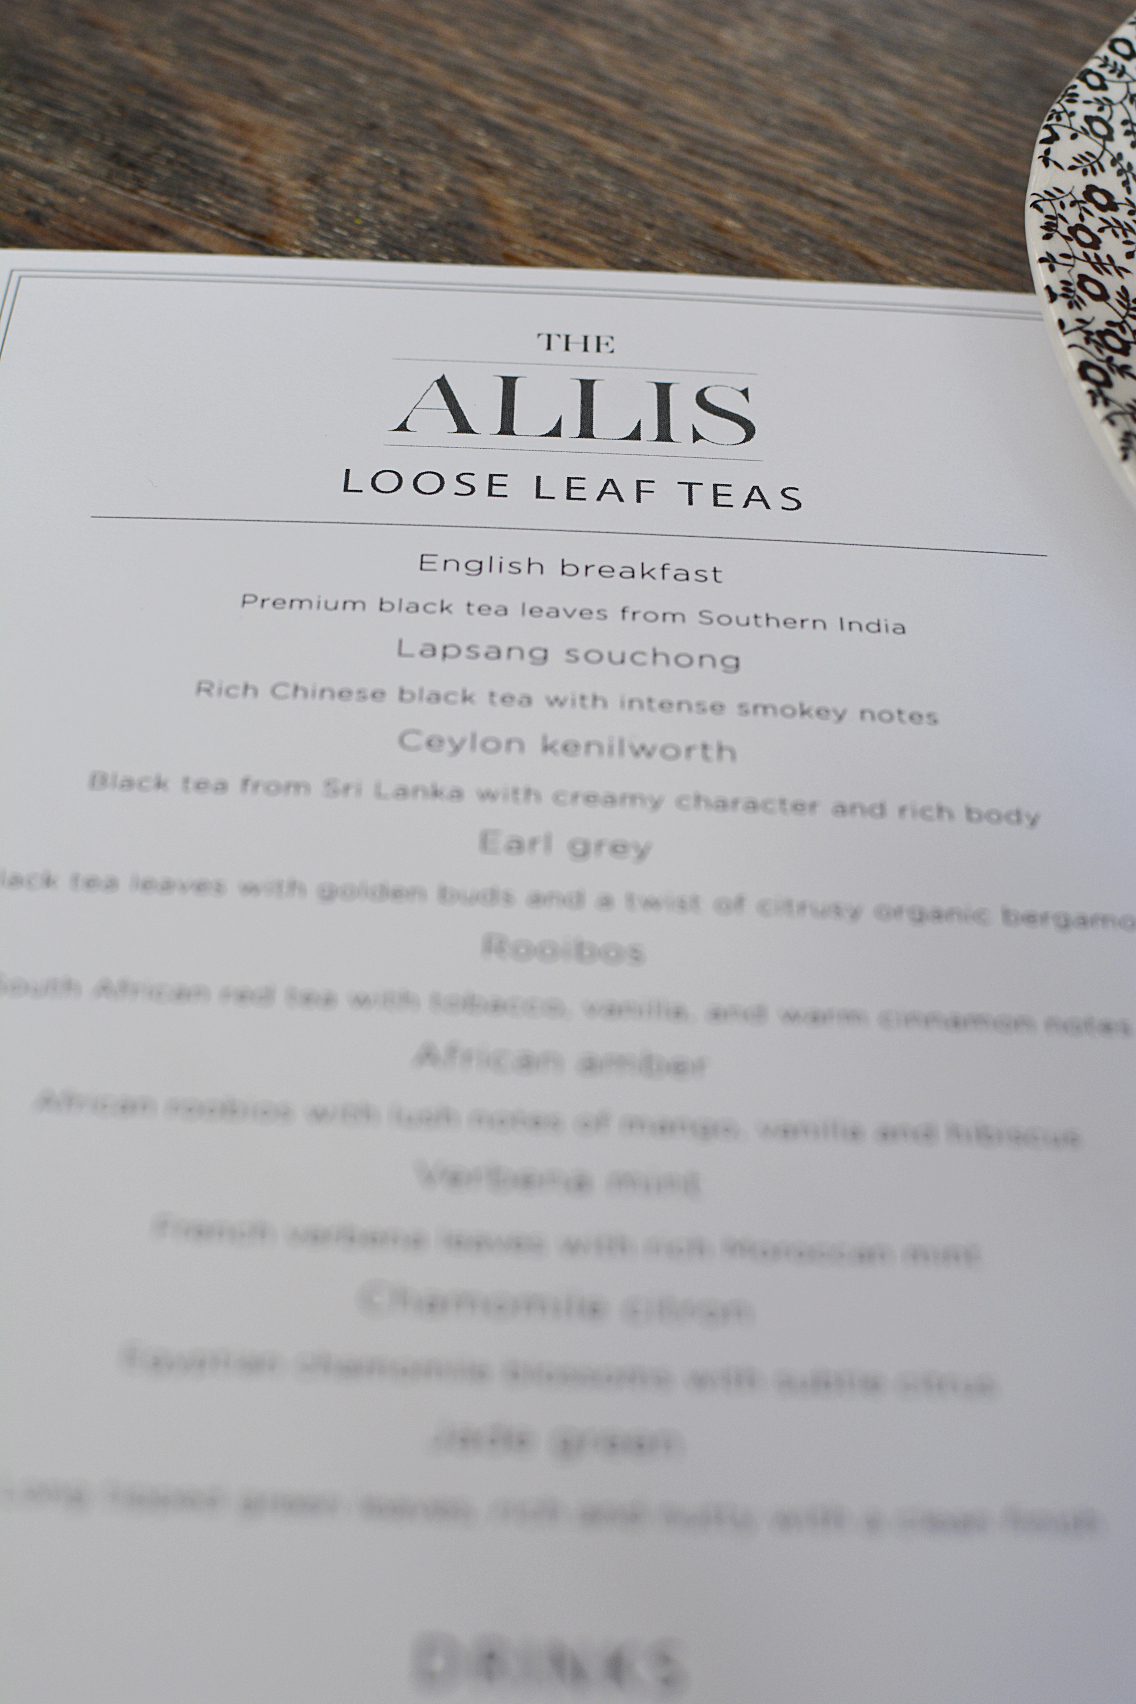 Afternoon Tea at The Allis Soho House 2